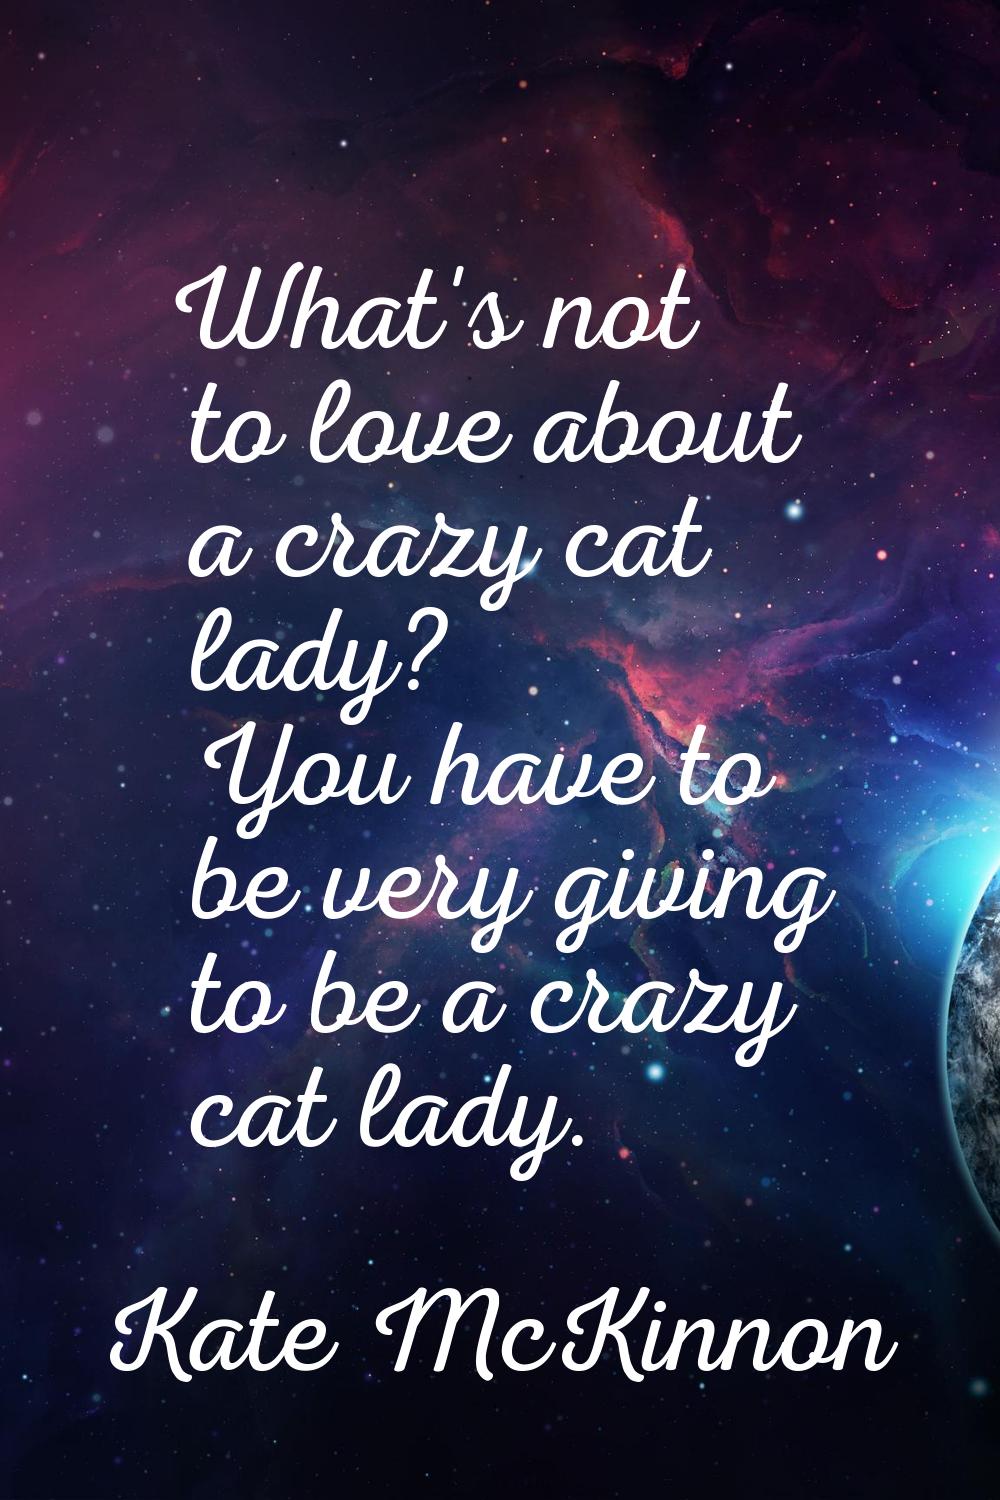 What's not to love about a crazy cat lady? You have to be very giving to be a crazy cat lady.